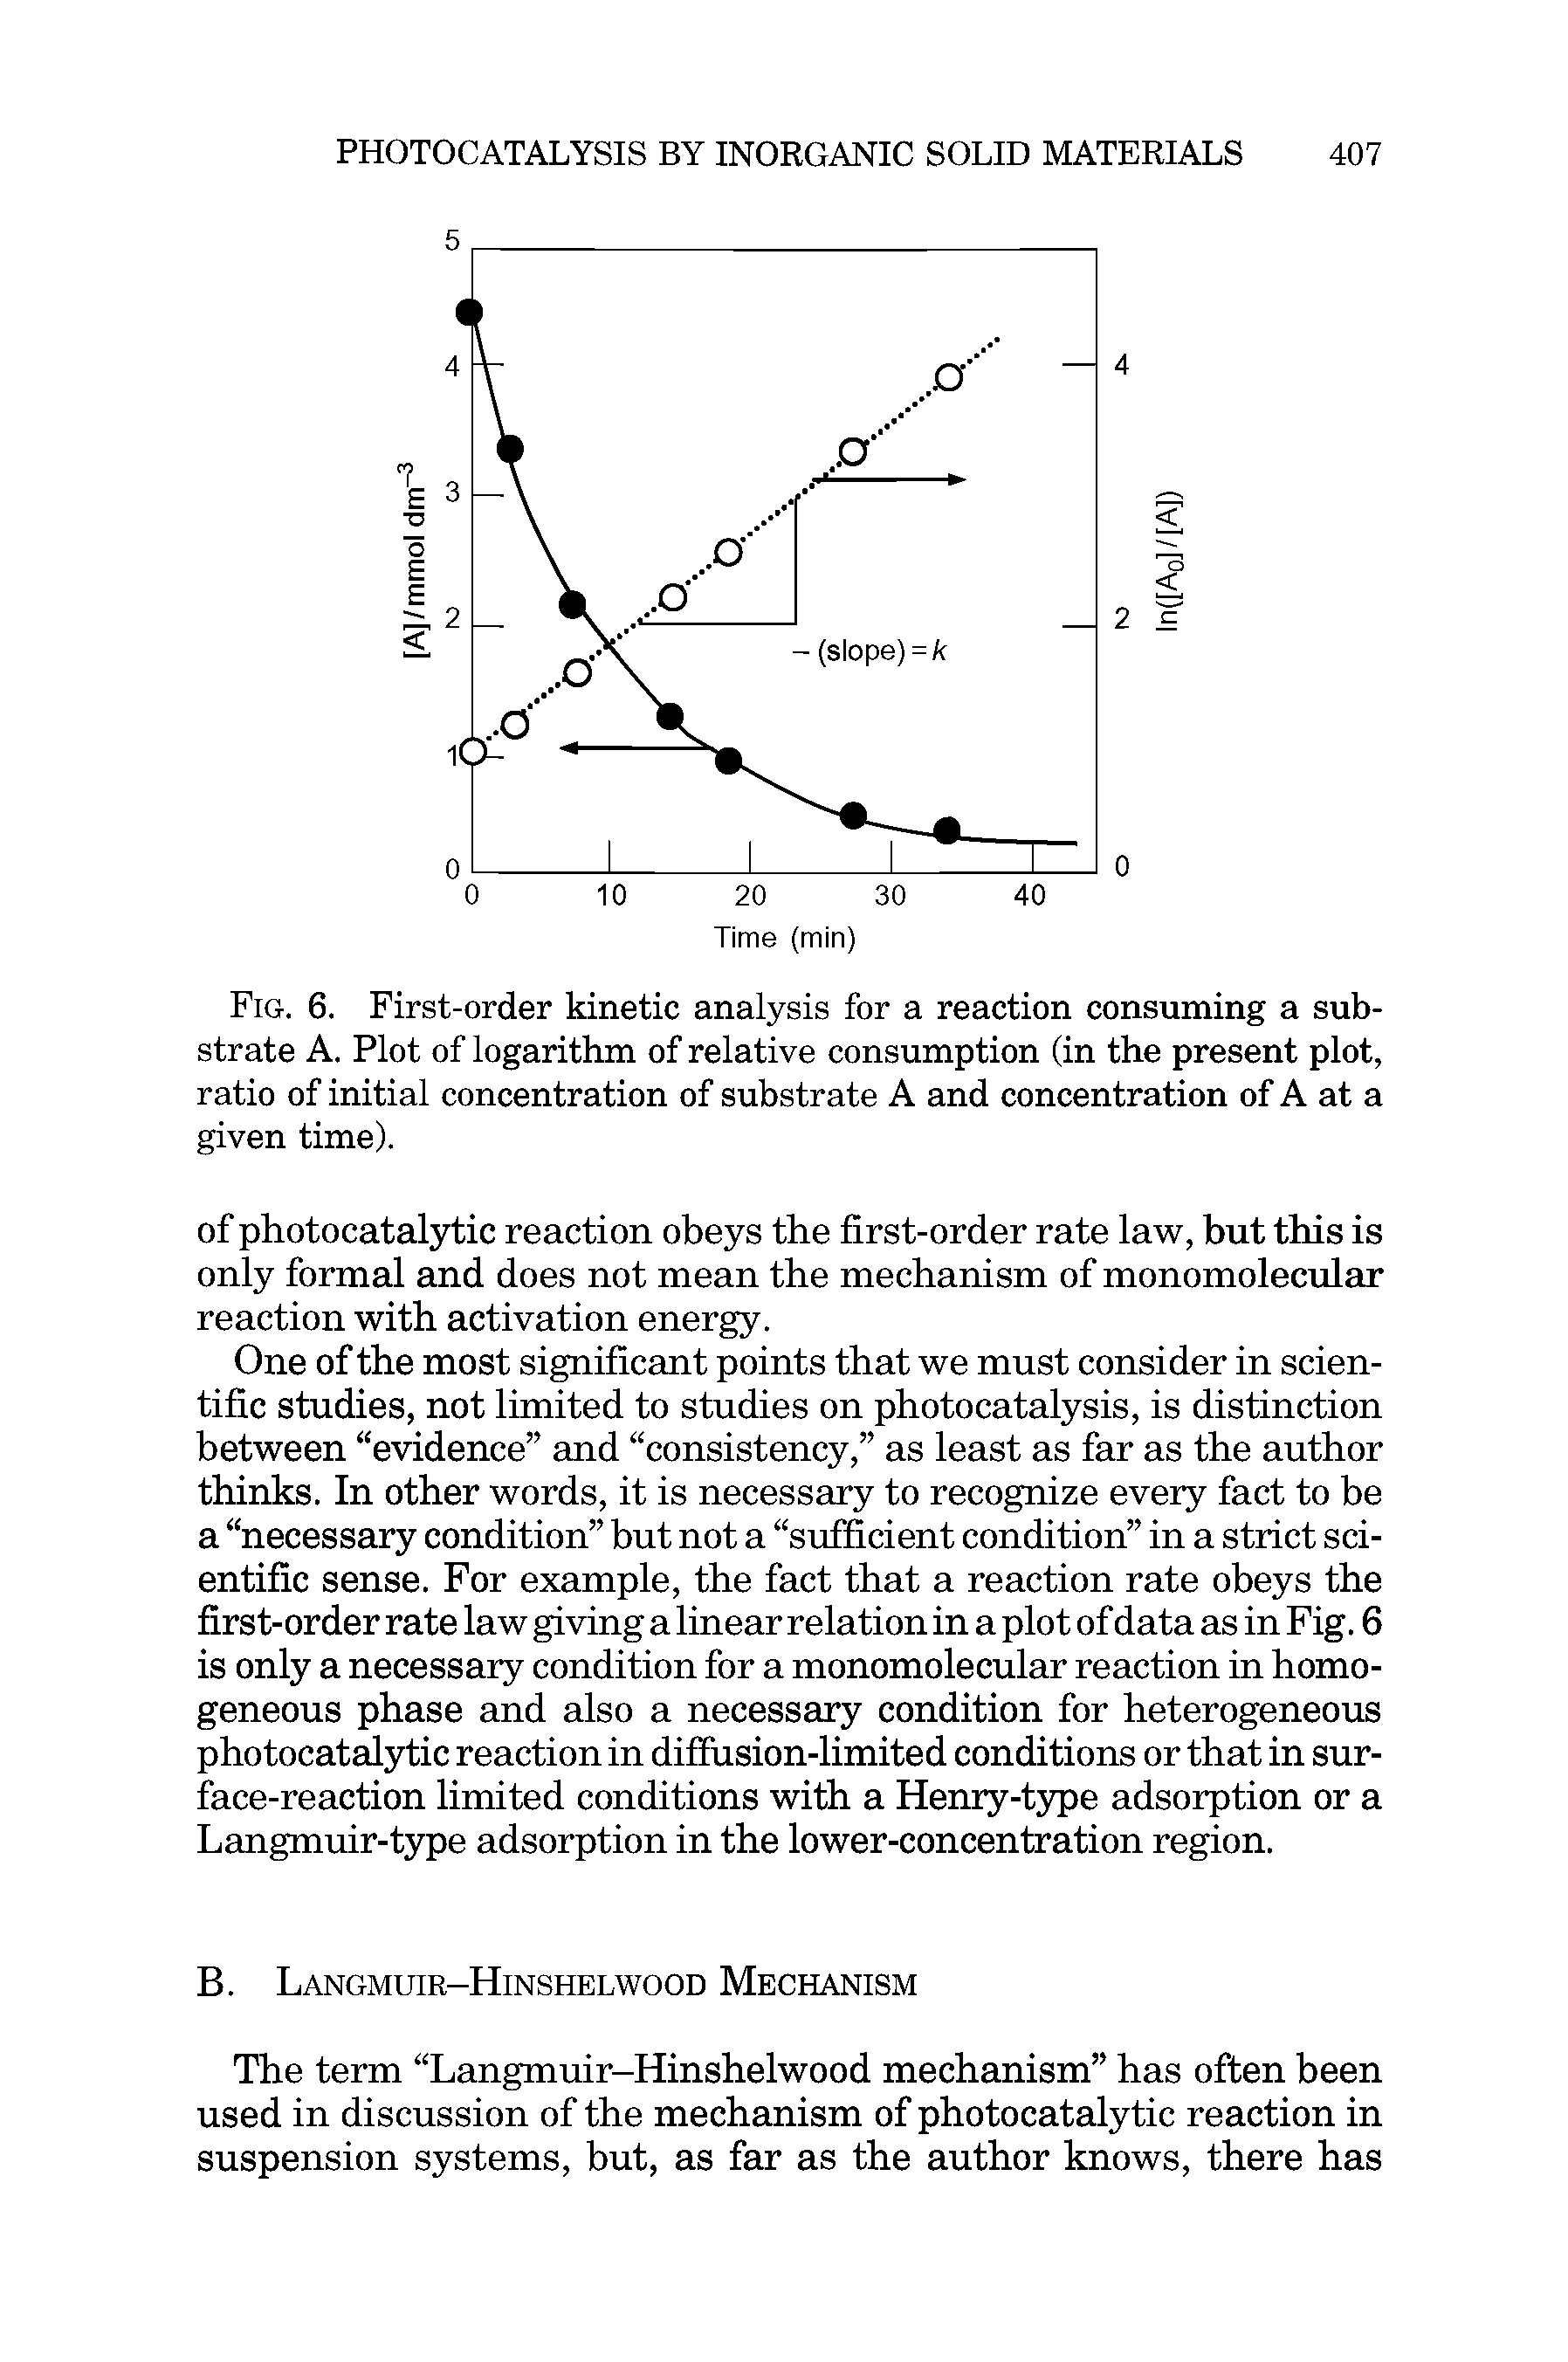 Fig. 6. First-order kinetic analysis for a reaction consuming a substrate A. Plot of logarithm of relative consumption (in the present plot, ratio of initial concentration of substrate A and concentration of A at a given time).